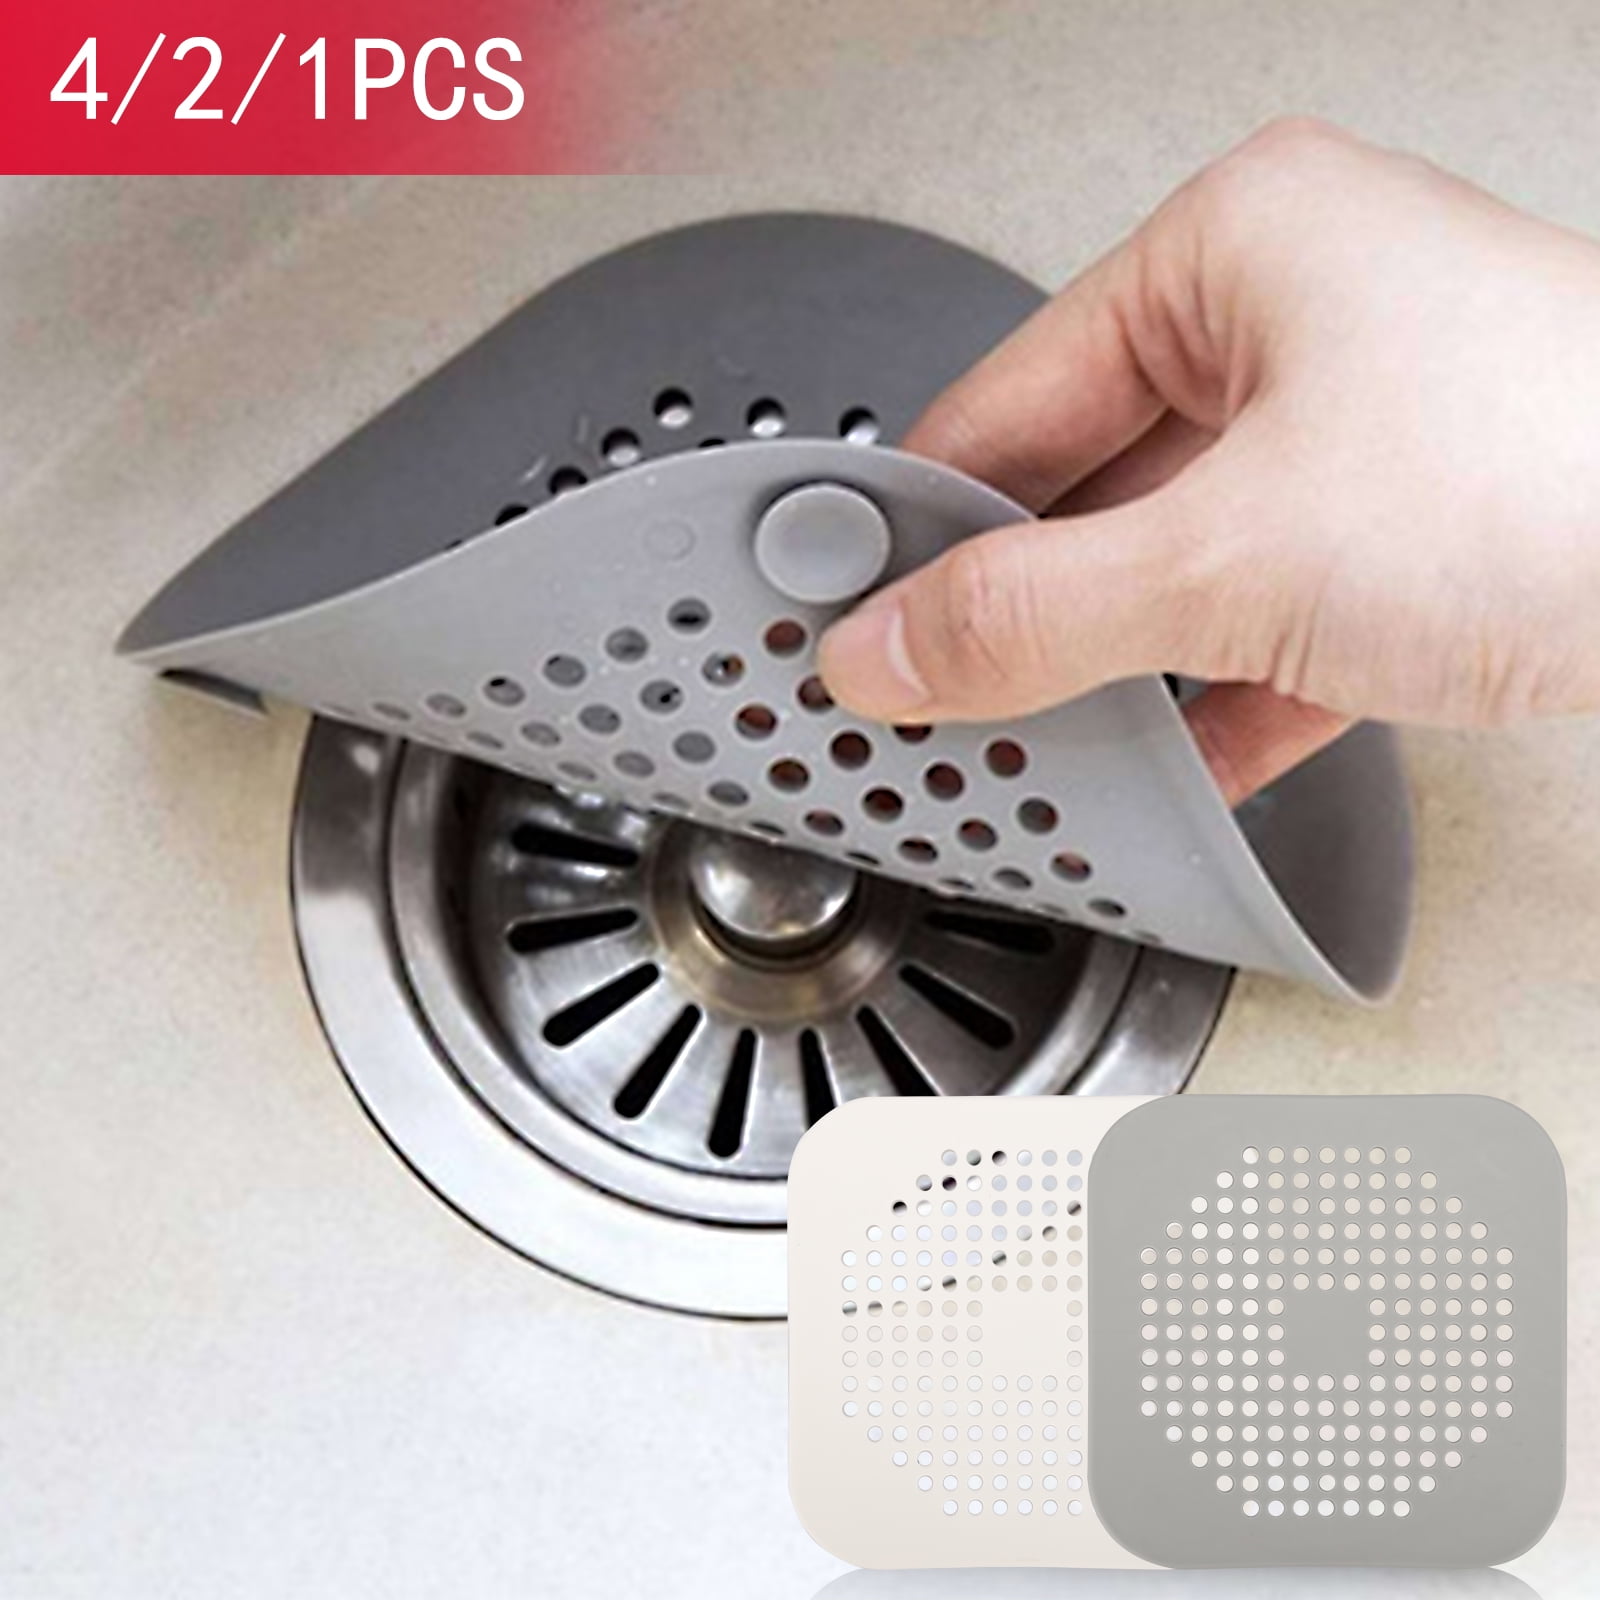 4 Pcs Starfish Shaped Rubber Sink Strainer Floor Drain Cover Hair Bath Catcher Stopper Rubber Shower Trap Basin Filter Cover